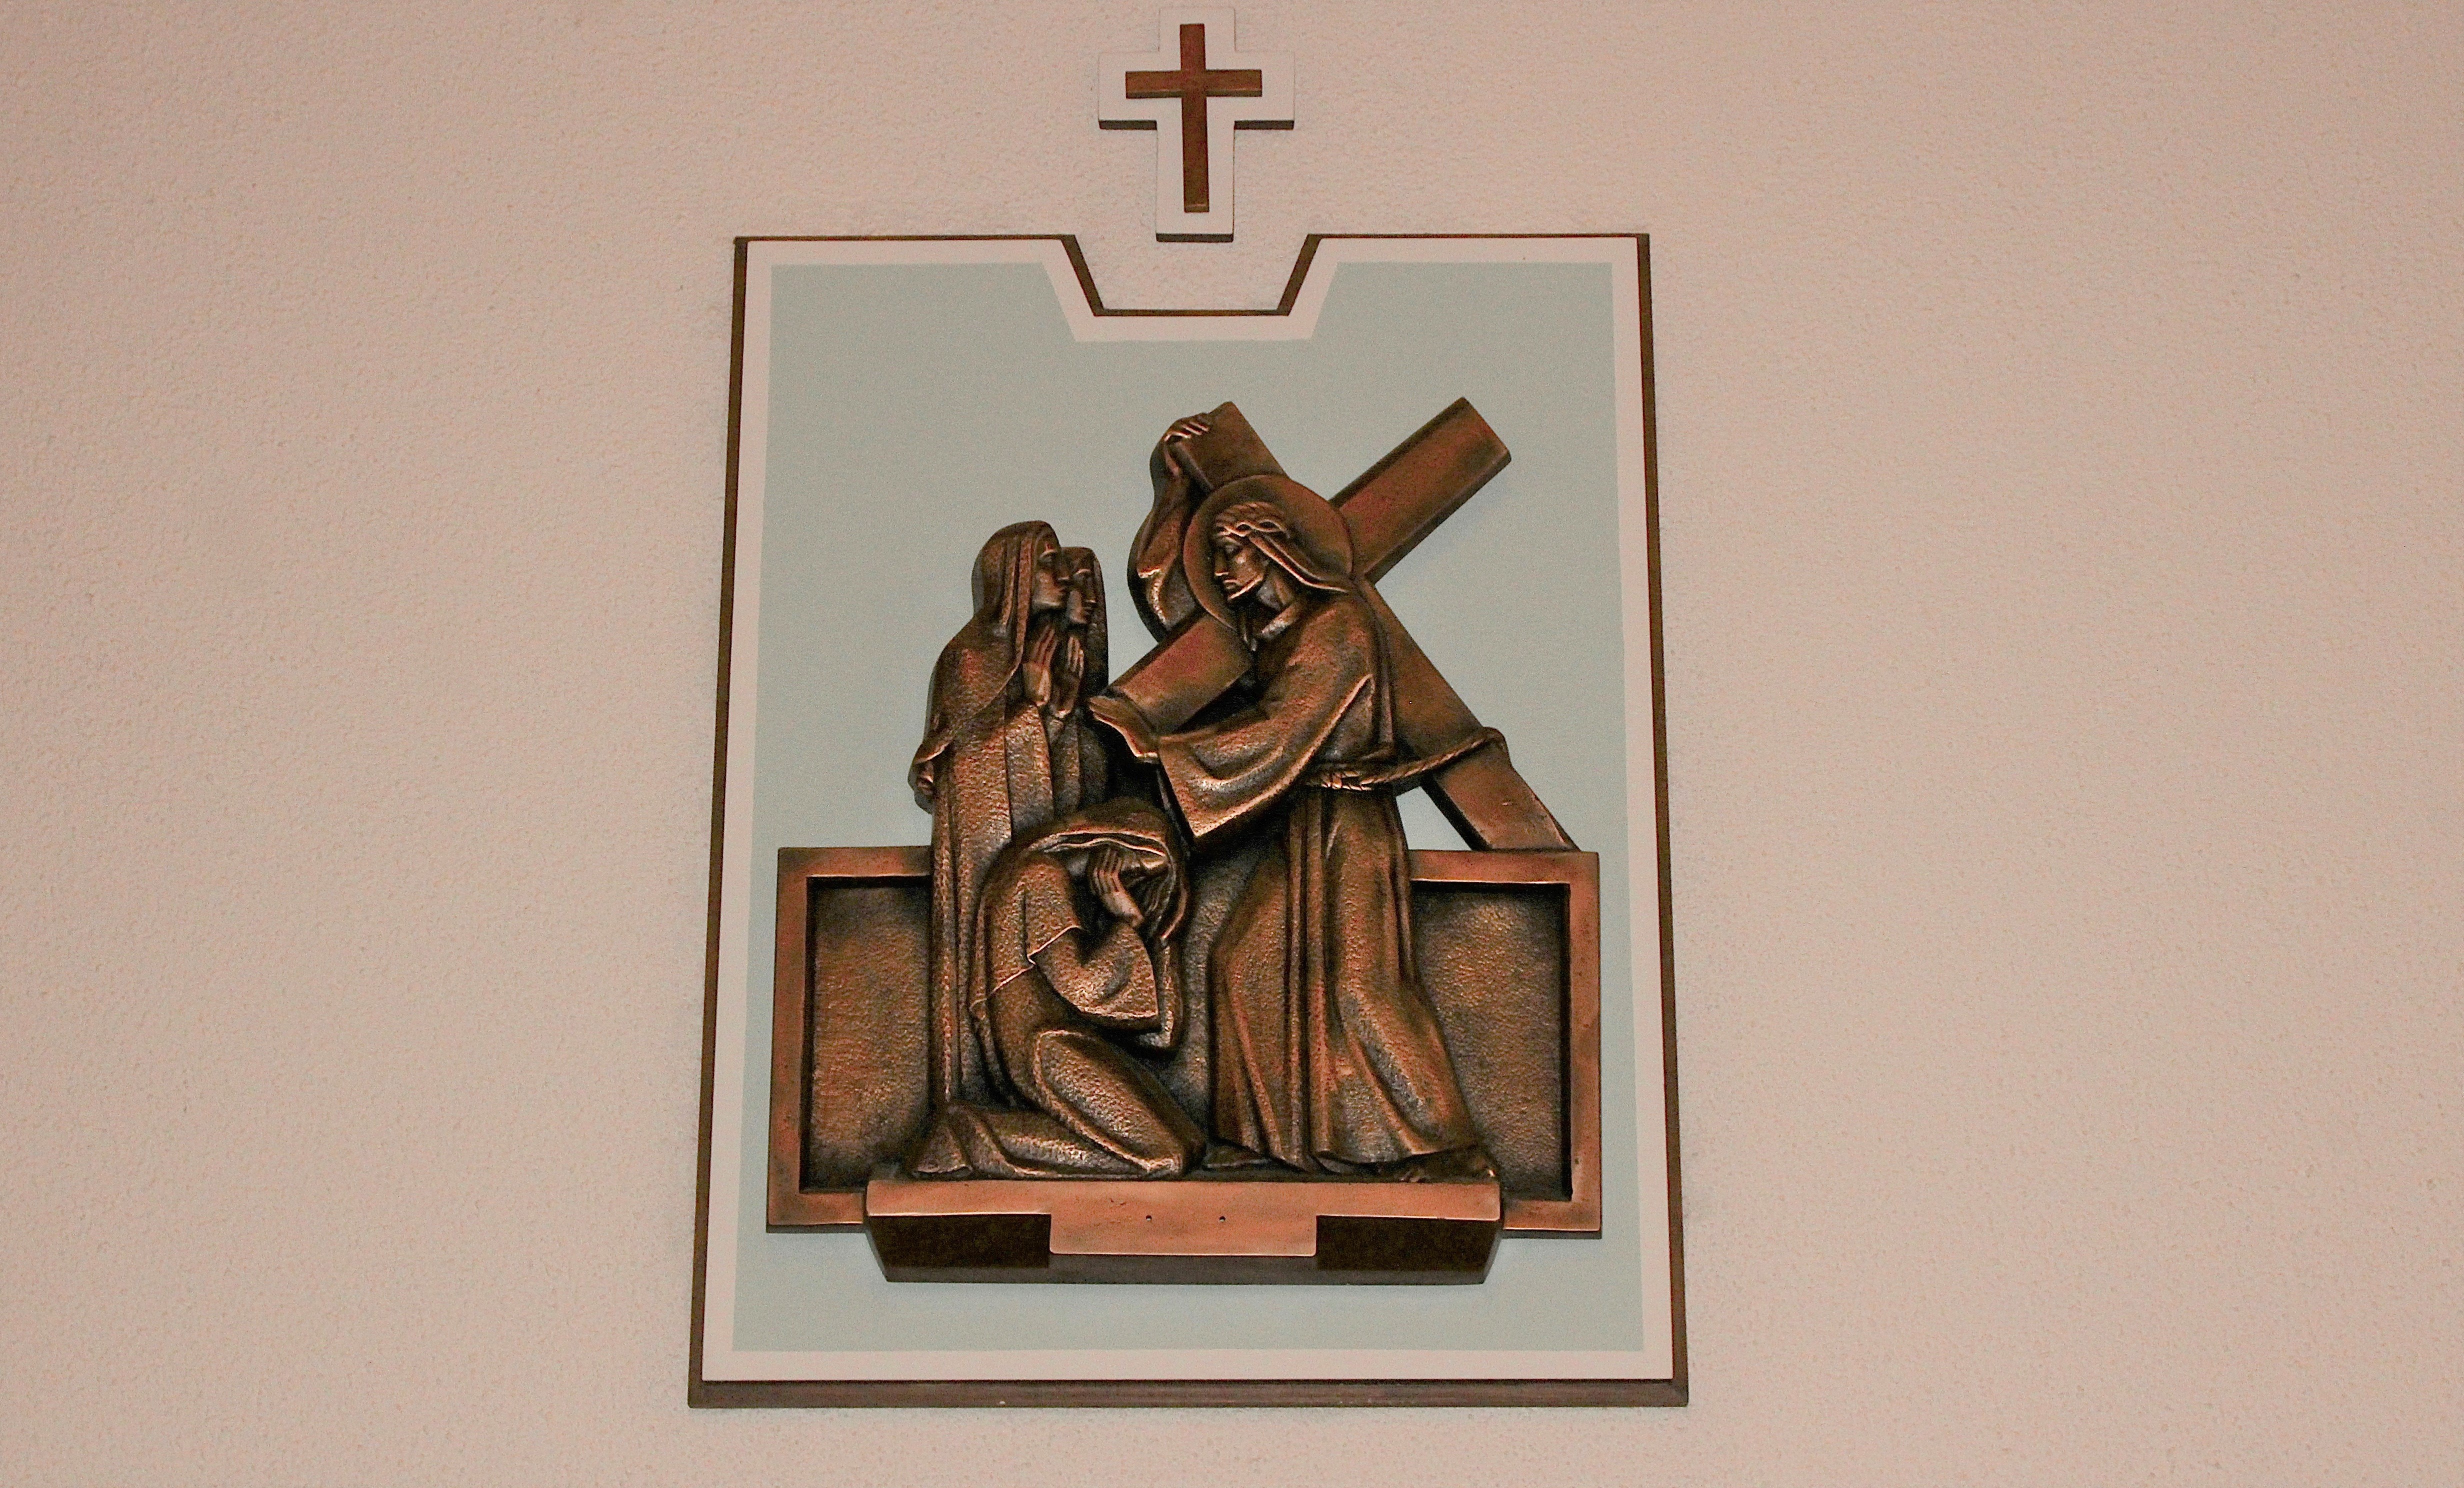 Picture of the 8th Station of the Cross plaque inside the church